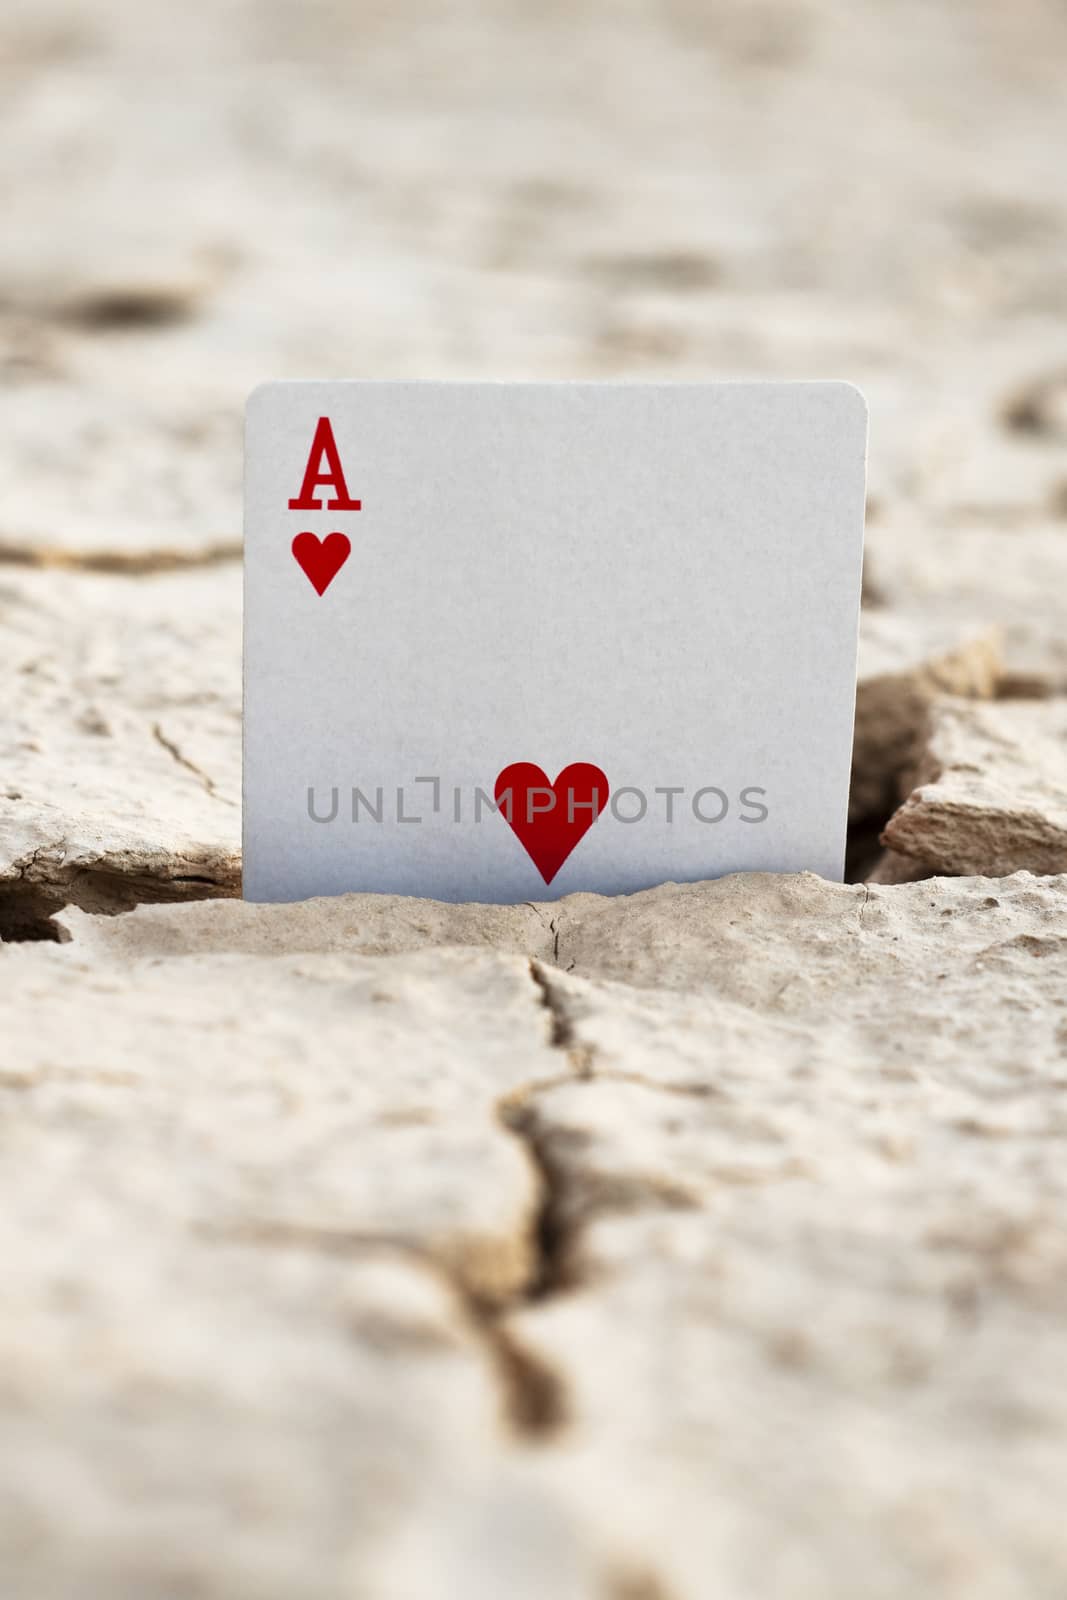 red ace playing card in a cracked desert grounds